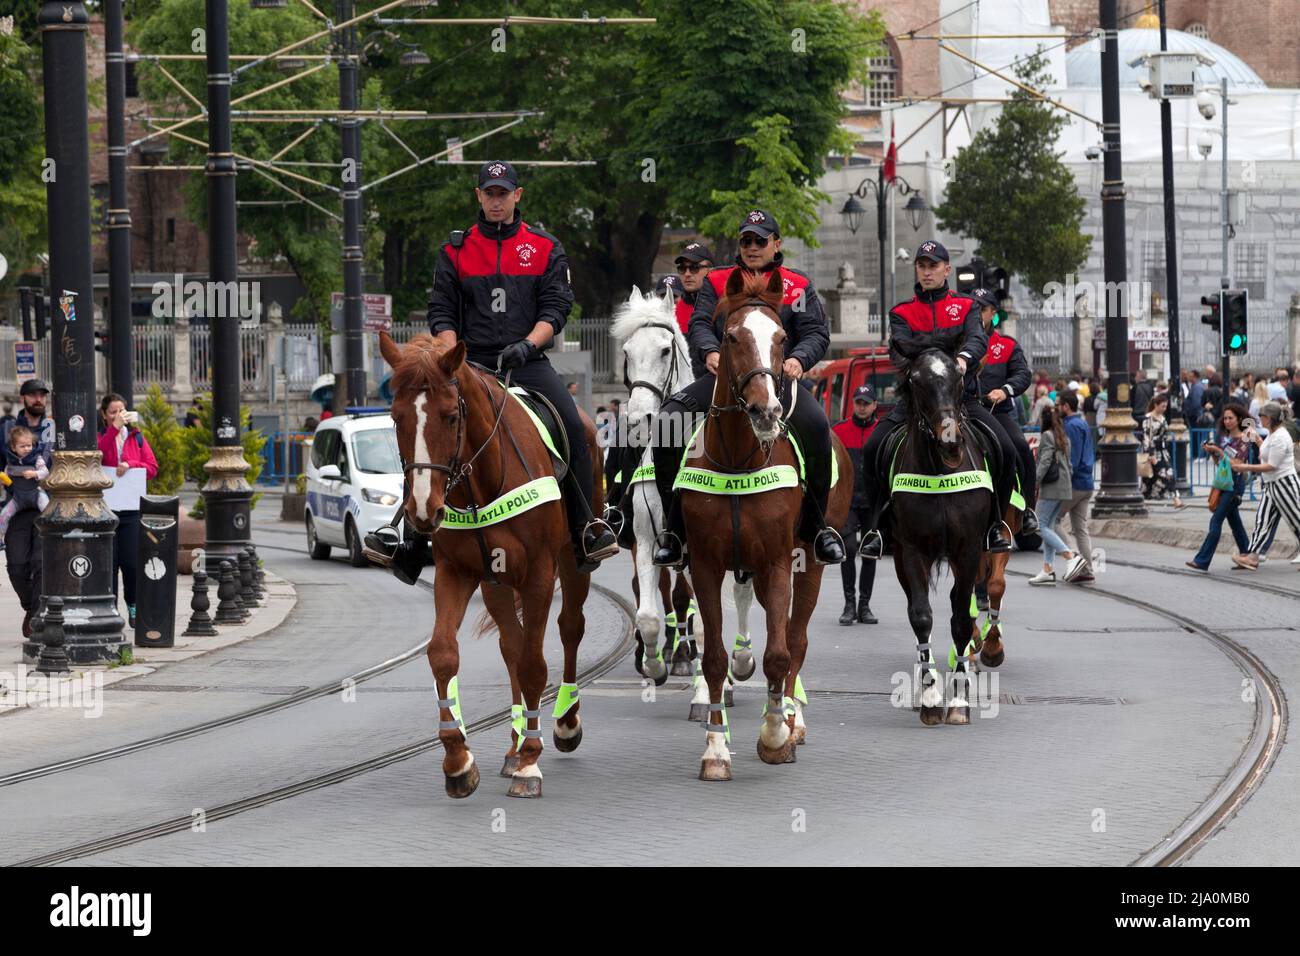 Istanbul, Turkey - May 09 2019: Mounted police officers from the Istanbul Equestrian Police (Istanbul atli polis). Stock Photo